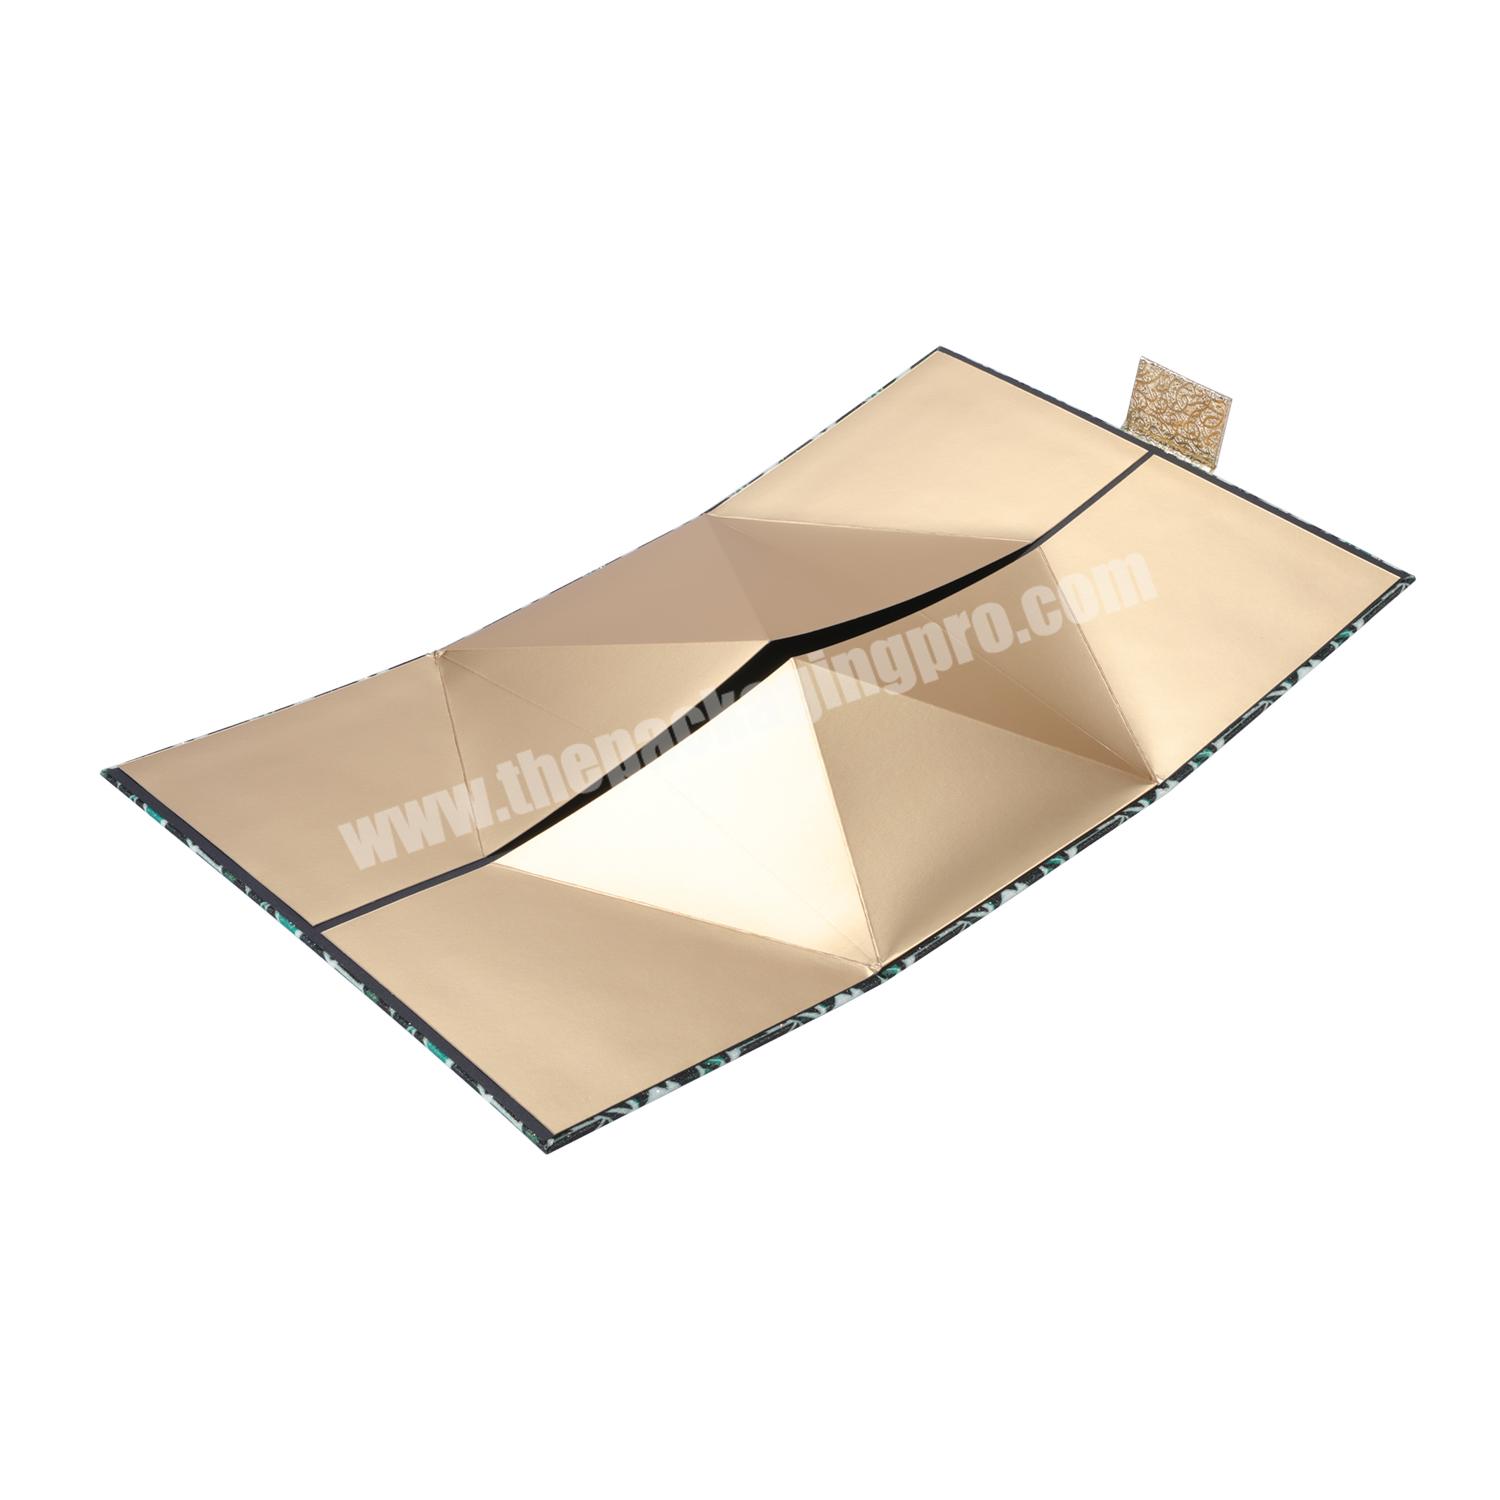 Custom Collapsible Magnetic Box Design Folding Cardboard Packaging Box for Skin Care Set